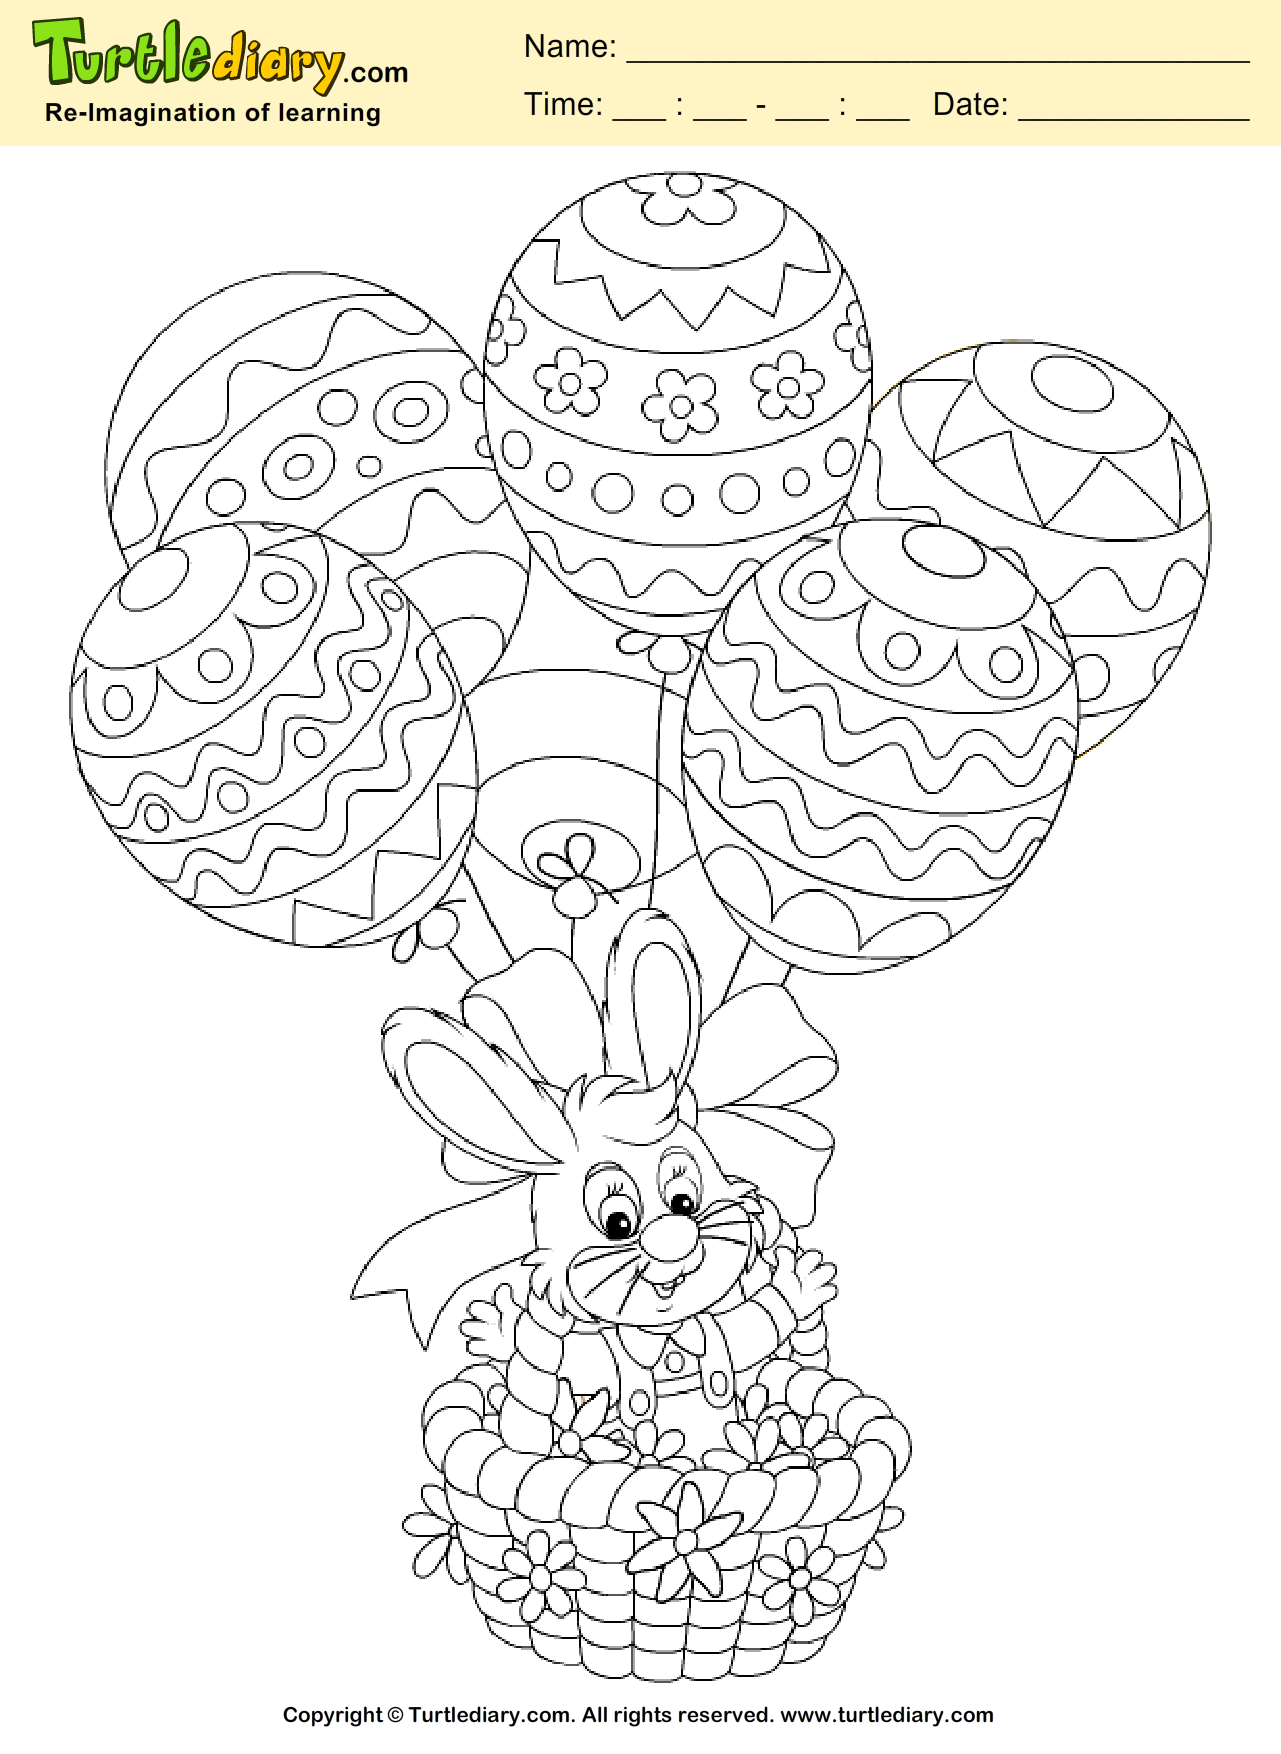 Easter Bunny Coloring Sheet